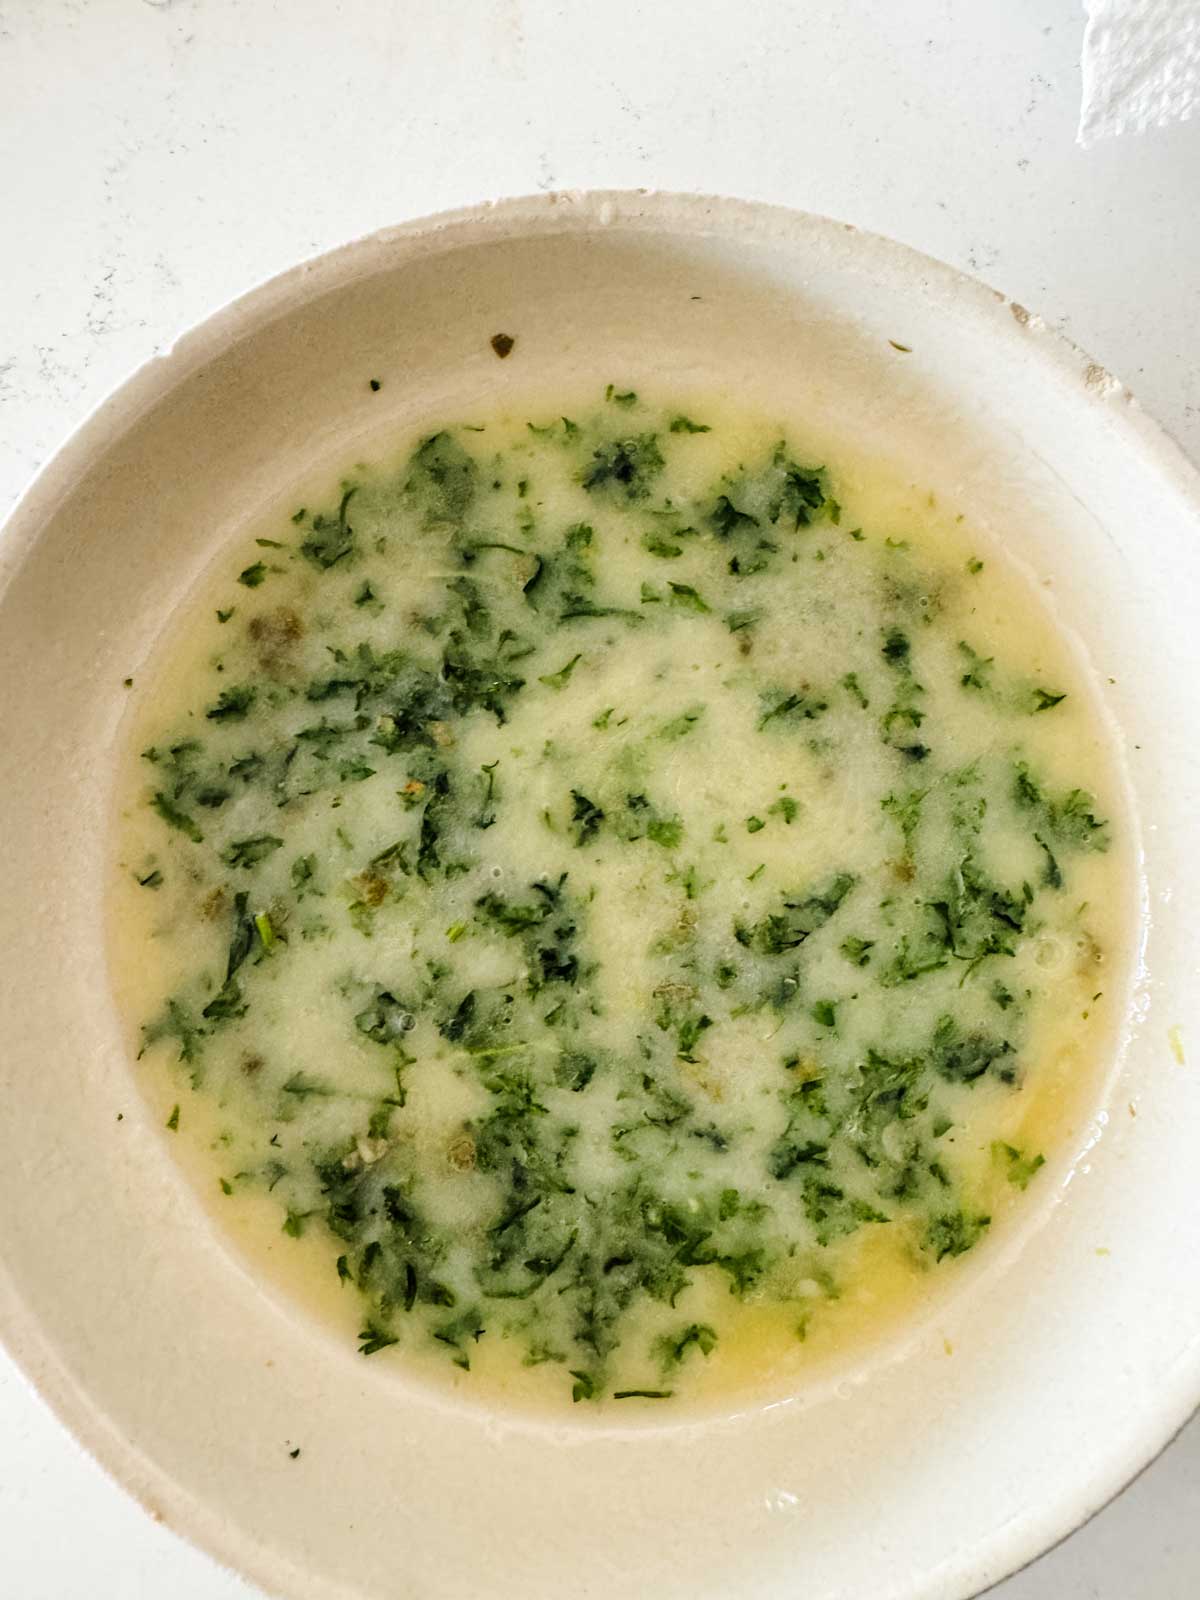 Parsley butter in a bowl.